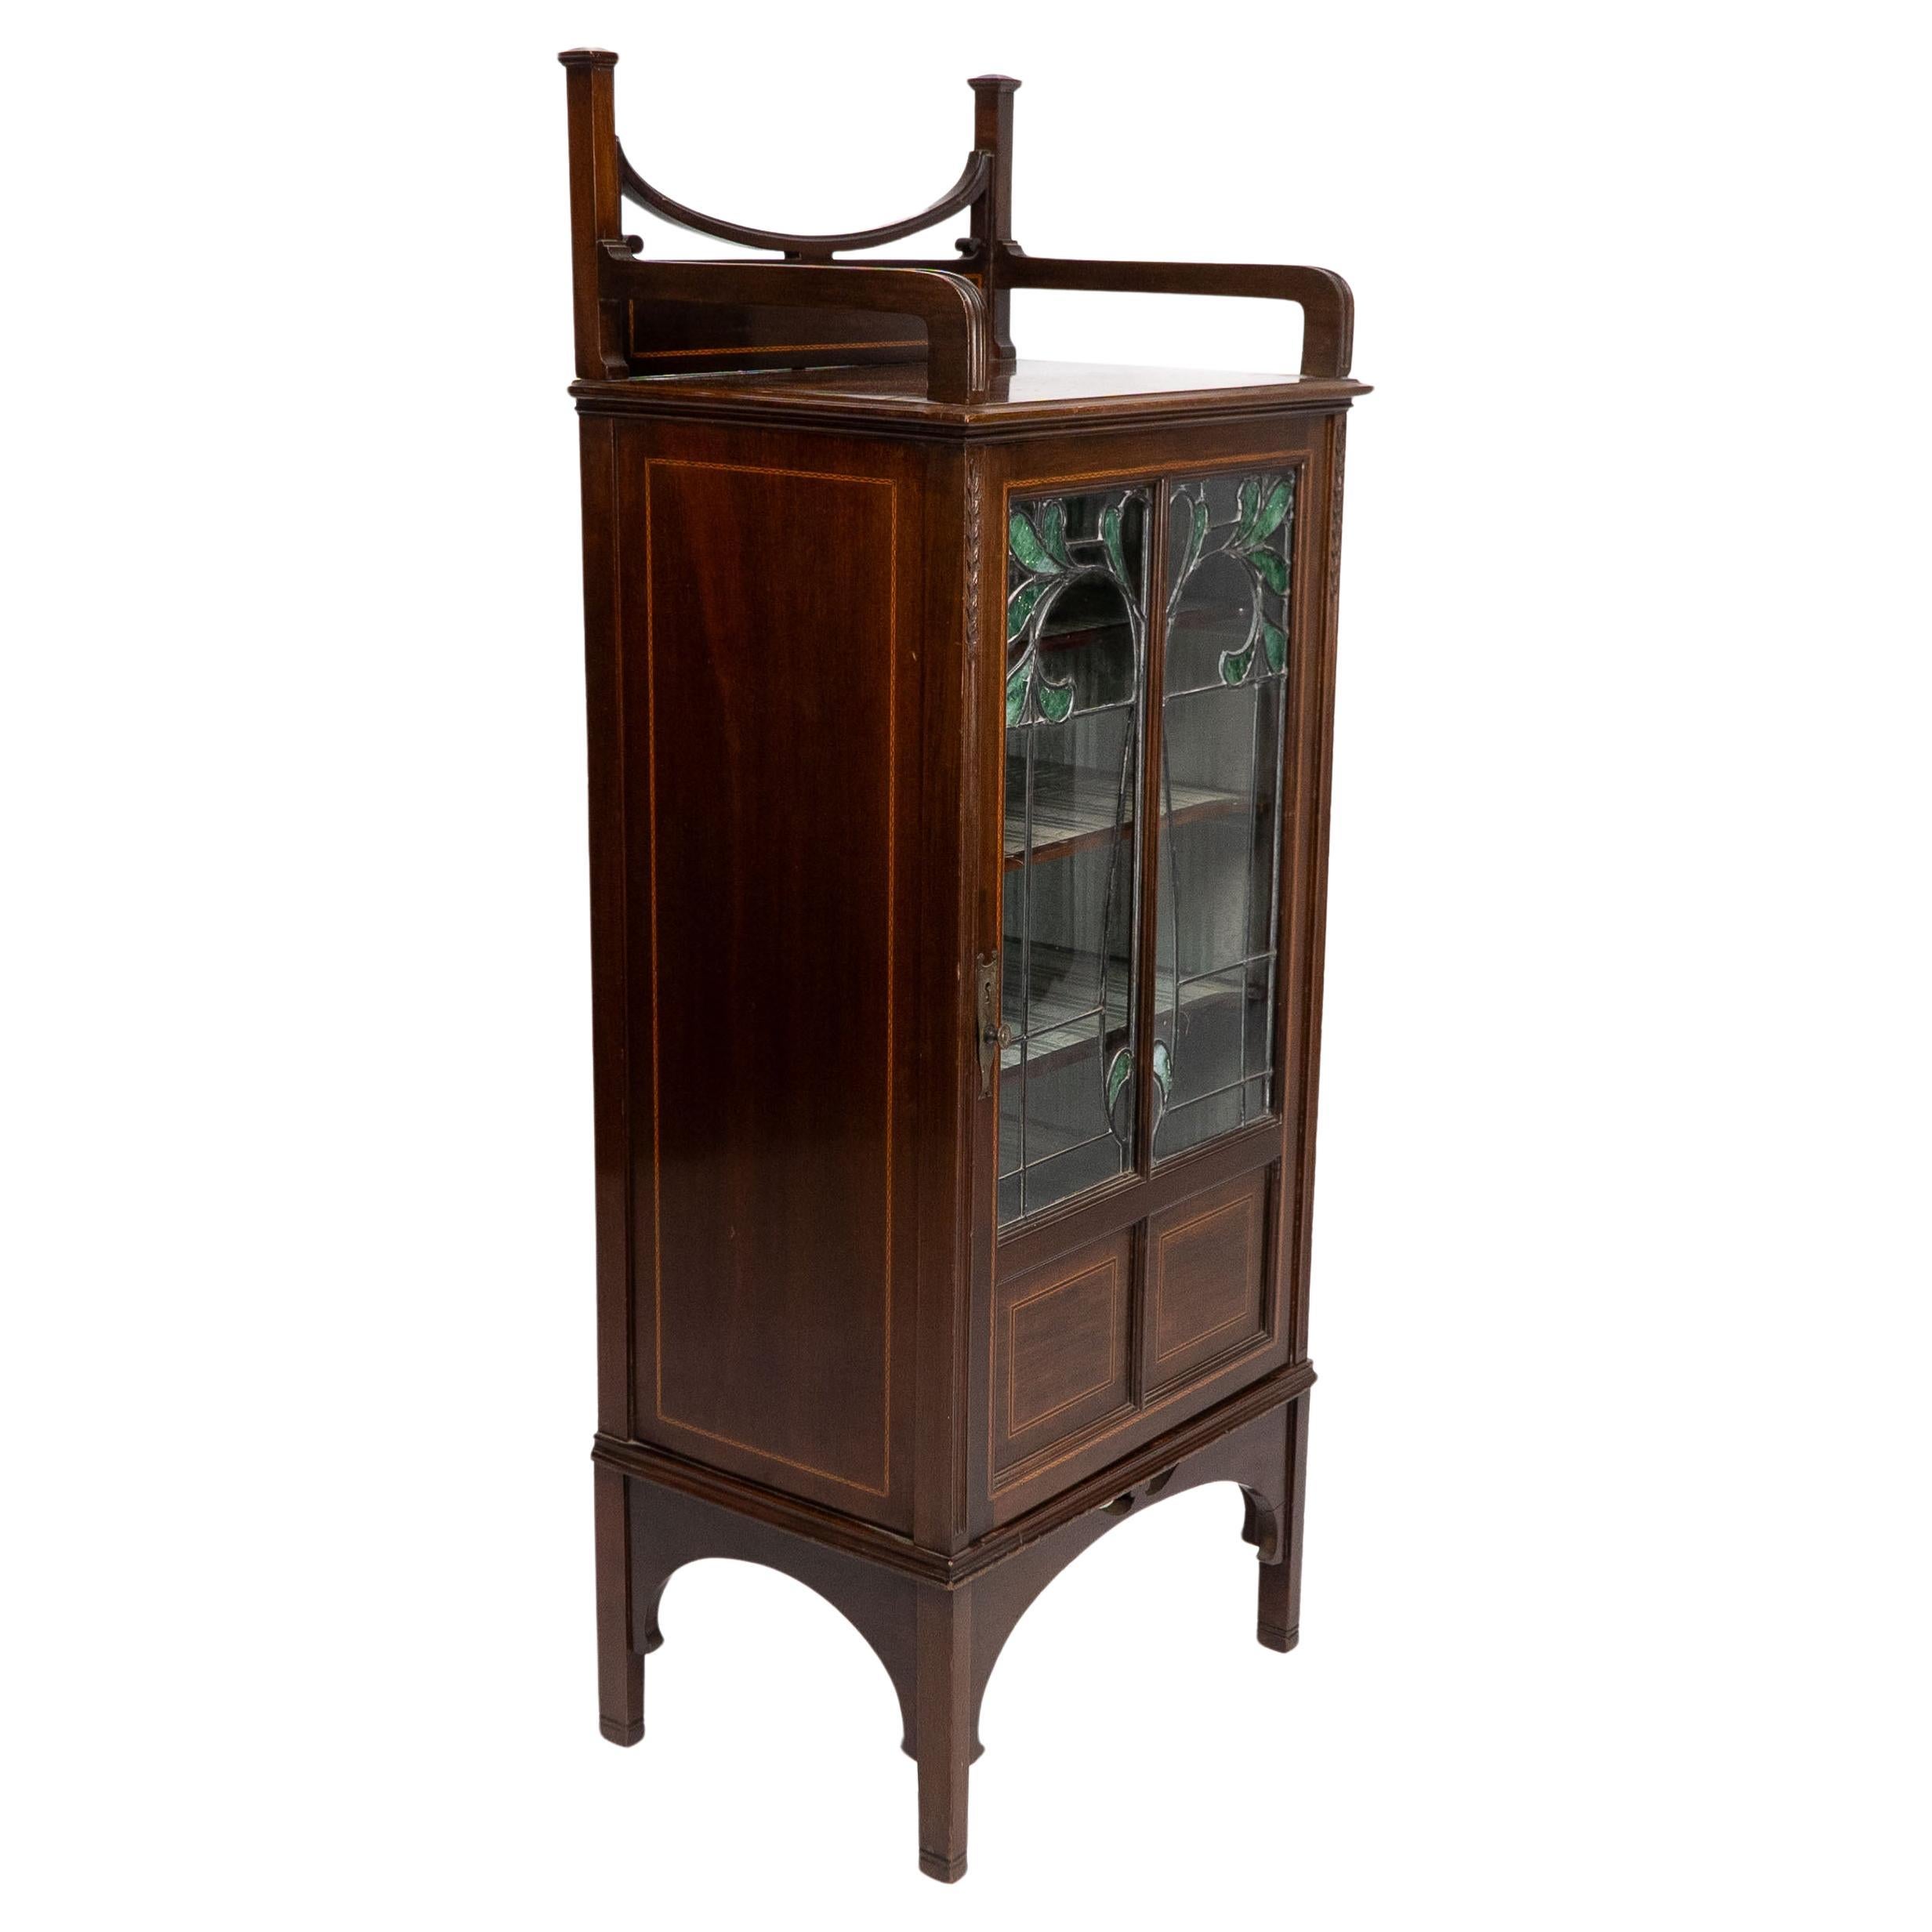 A Petite Arts & Crafts Mahogany Display Cabinet in the Anglo-Japanese Style.